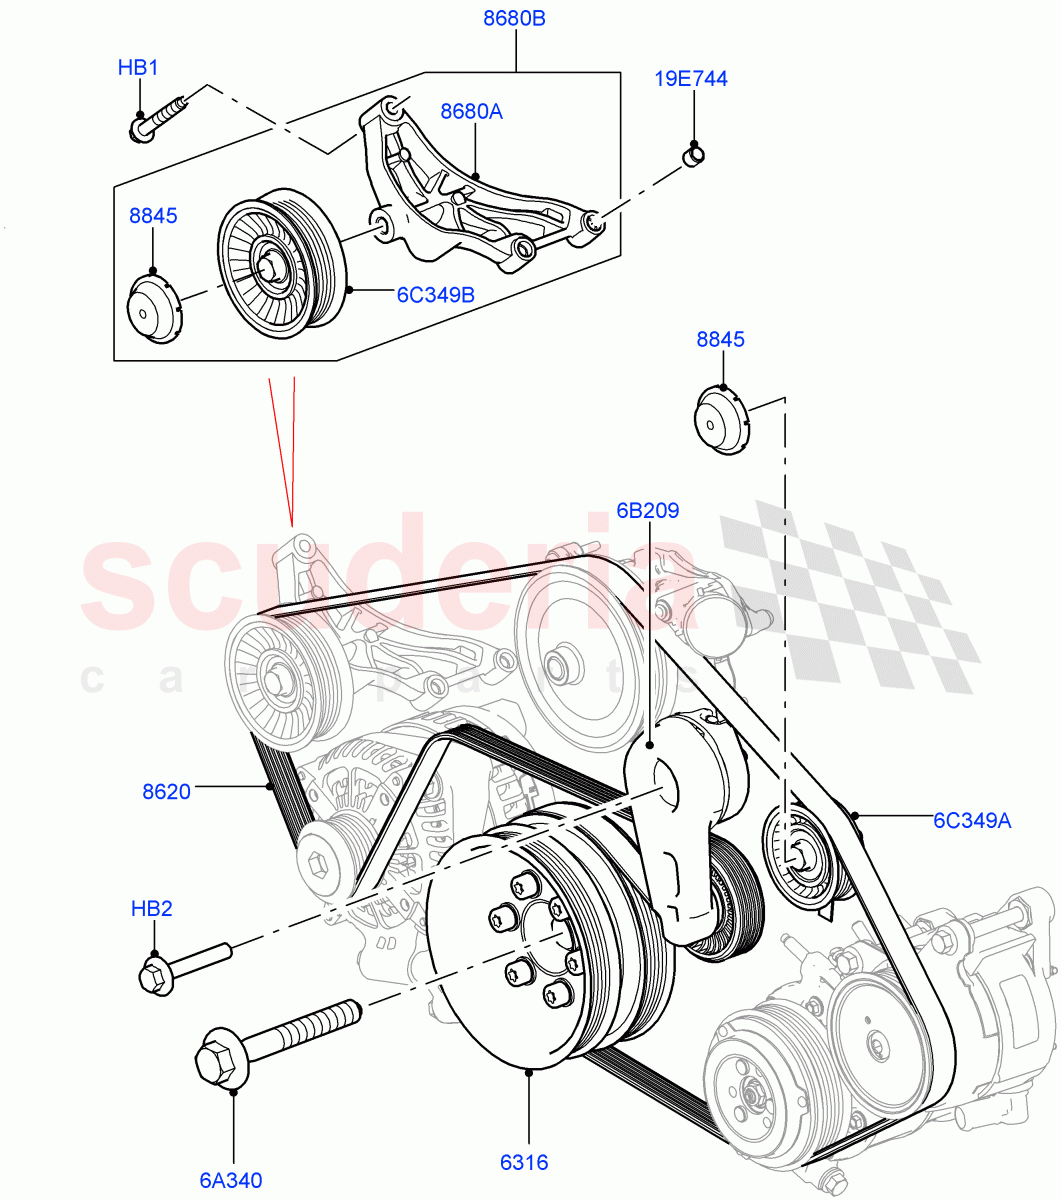 Pulleys And Drive Belts(Primary Drive)(5.0 Petrol AJ133 DOHC CDA,Electronic Air Suspension With ACE,5.0L P AJ133 DOHC CDA S/C Enhanced,Sport Suspension w/ARC)((V)FROMKA000001) of Land Rover Land Rover Range Rover (2012-2021) [5.0 OHC SGDI SC V8 Petrol]